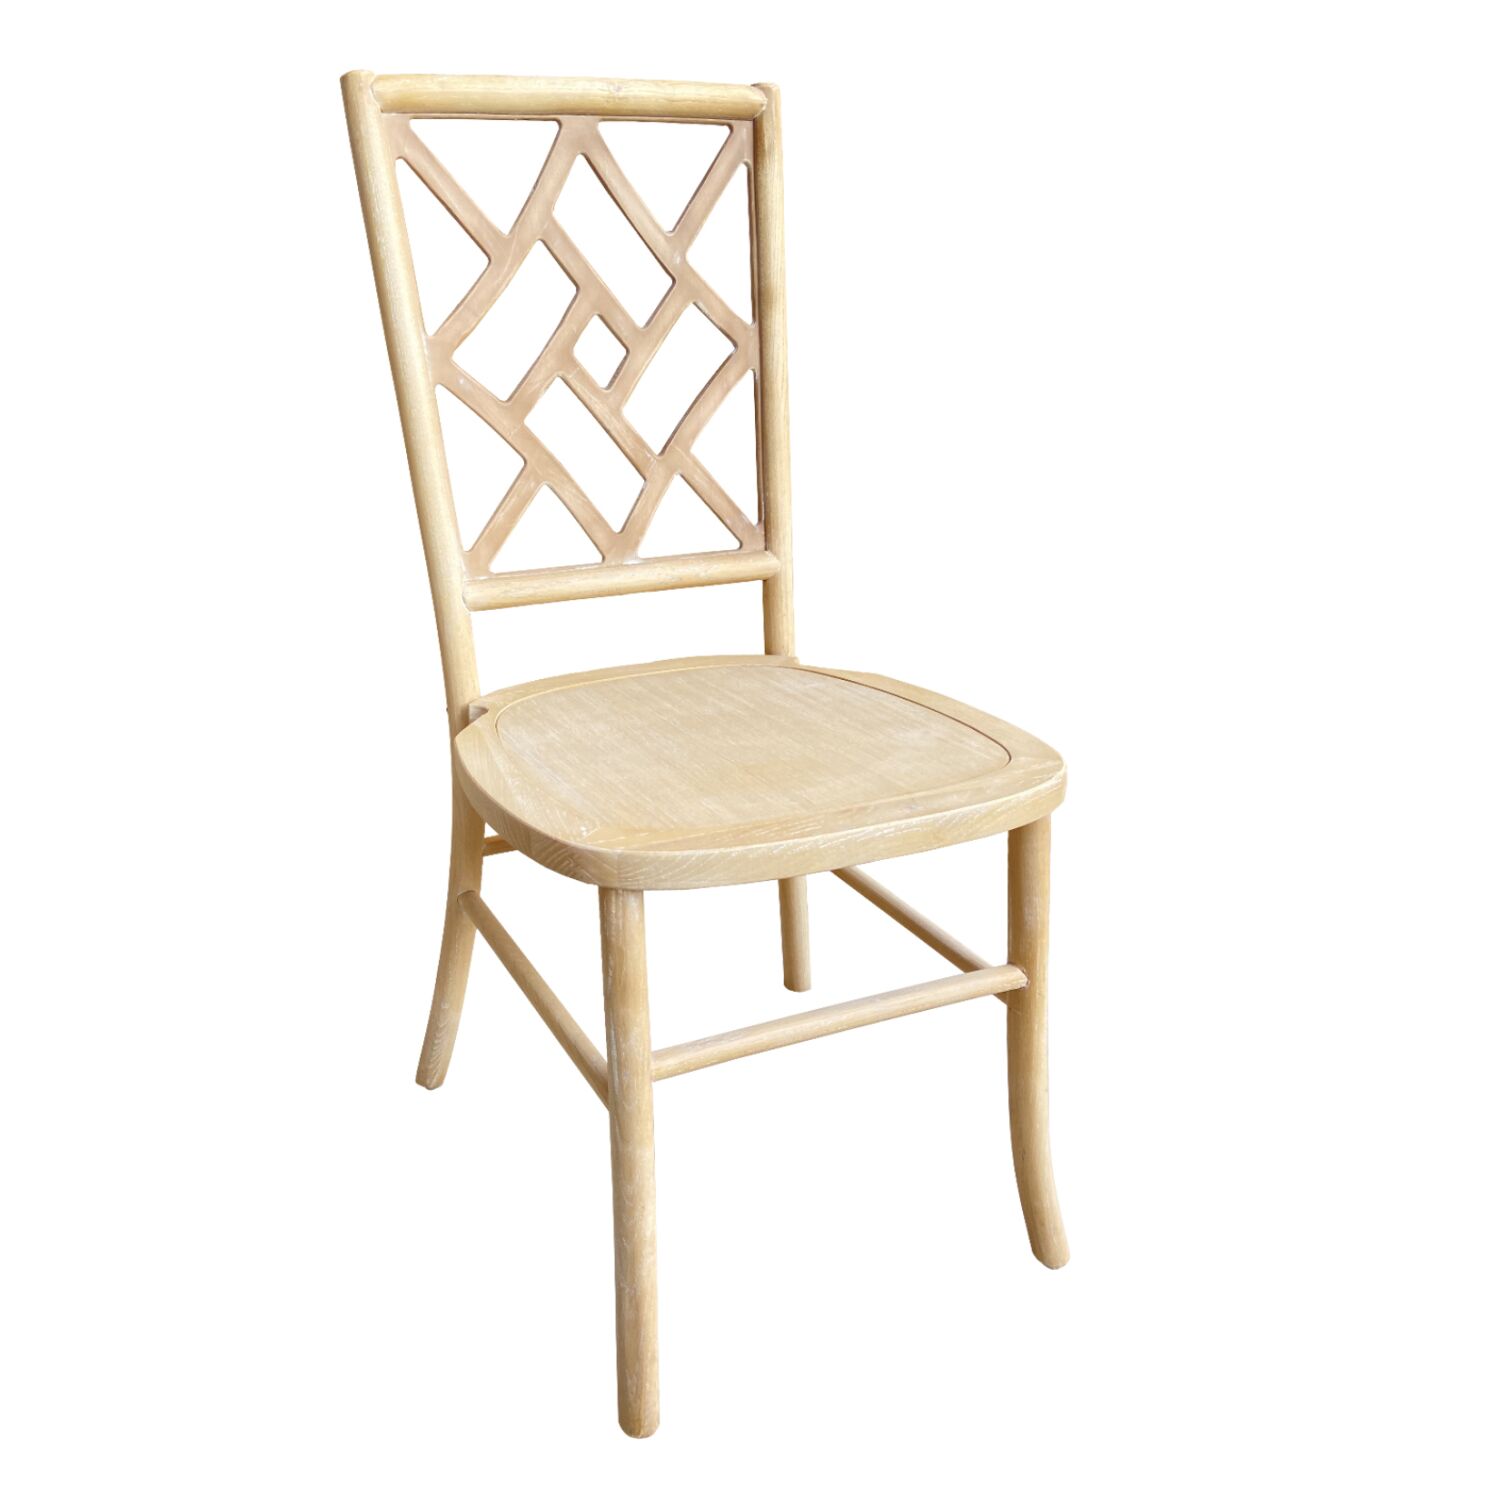 CHAIR TOON WOOD IN WHITEWASH AND PLYWOOD SEAT 41x46x95Ηcm.ΗΜ9410.05